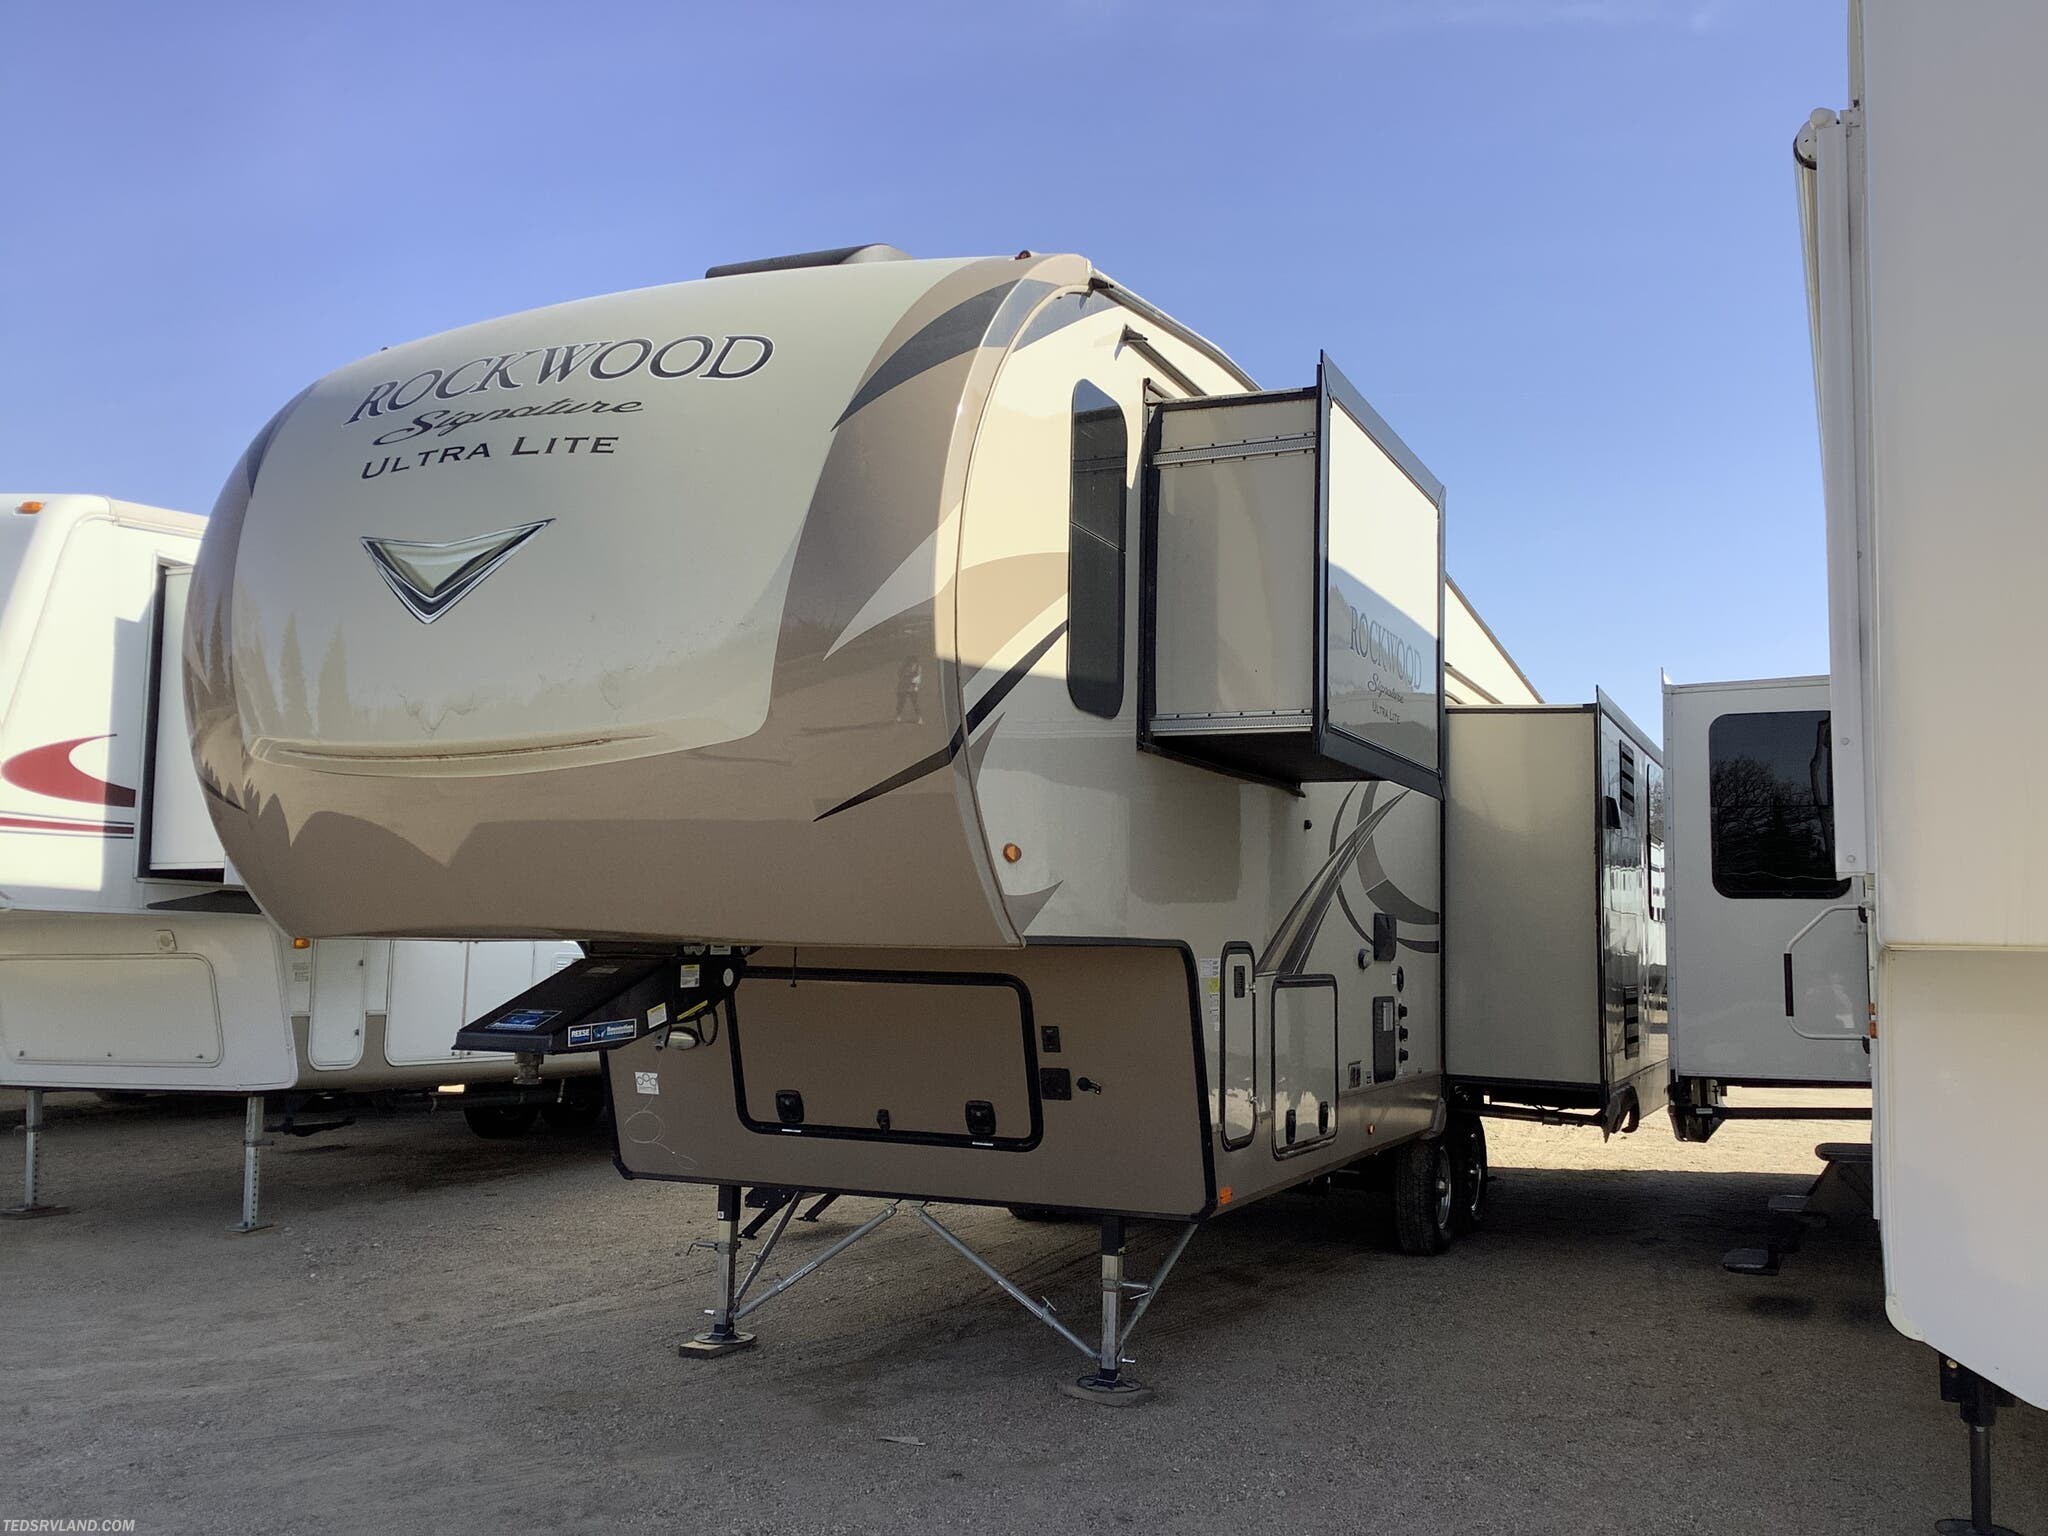 2018 Forest River Rockwood Signature Ultra Lite 8298WS RV for Sale in Paynesville, MN 56362 2018 Forest River Rockwood Signature Ultra Lite 8298ws